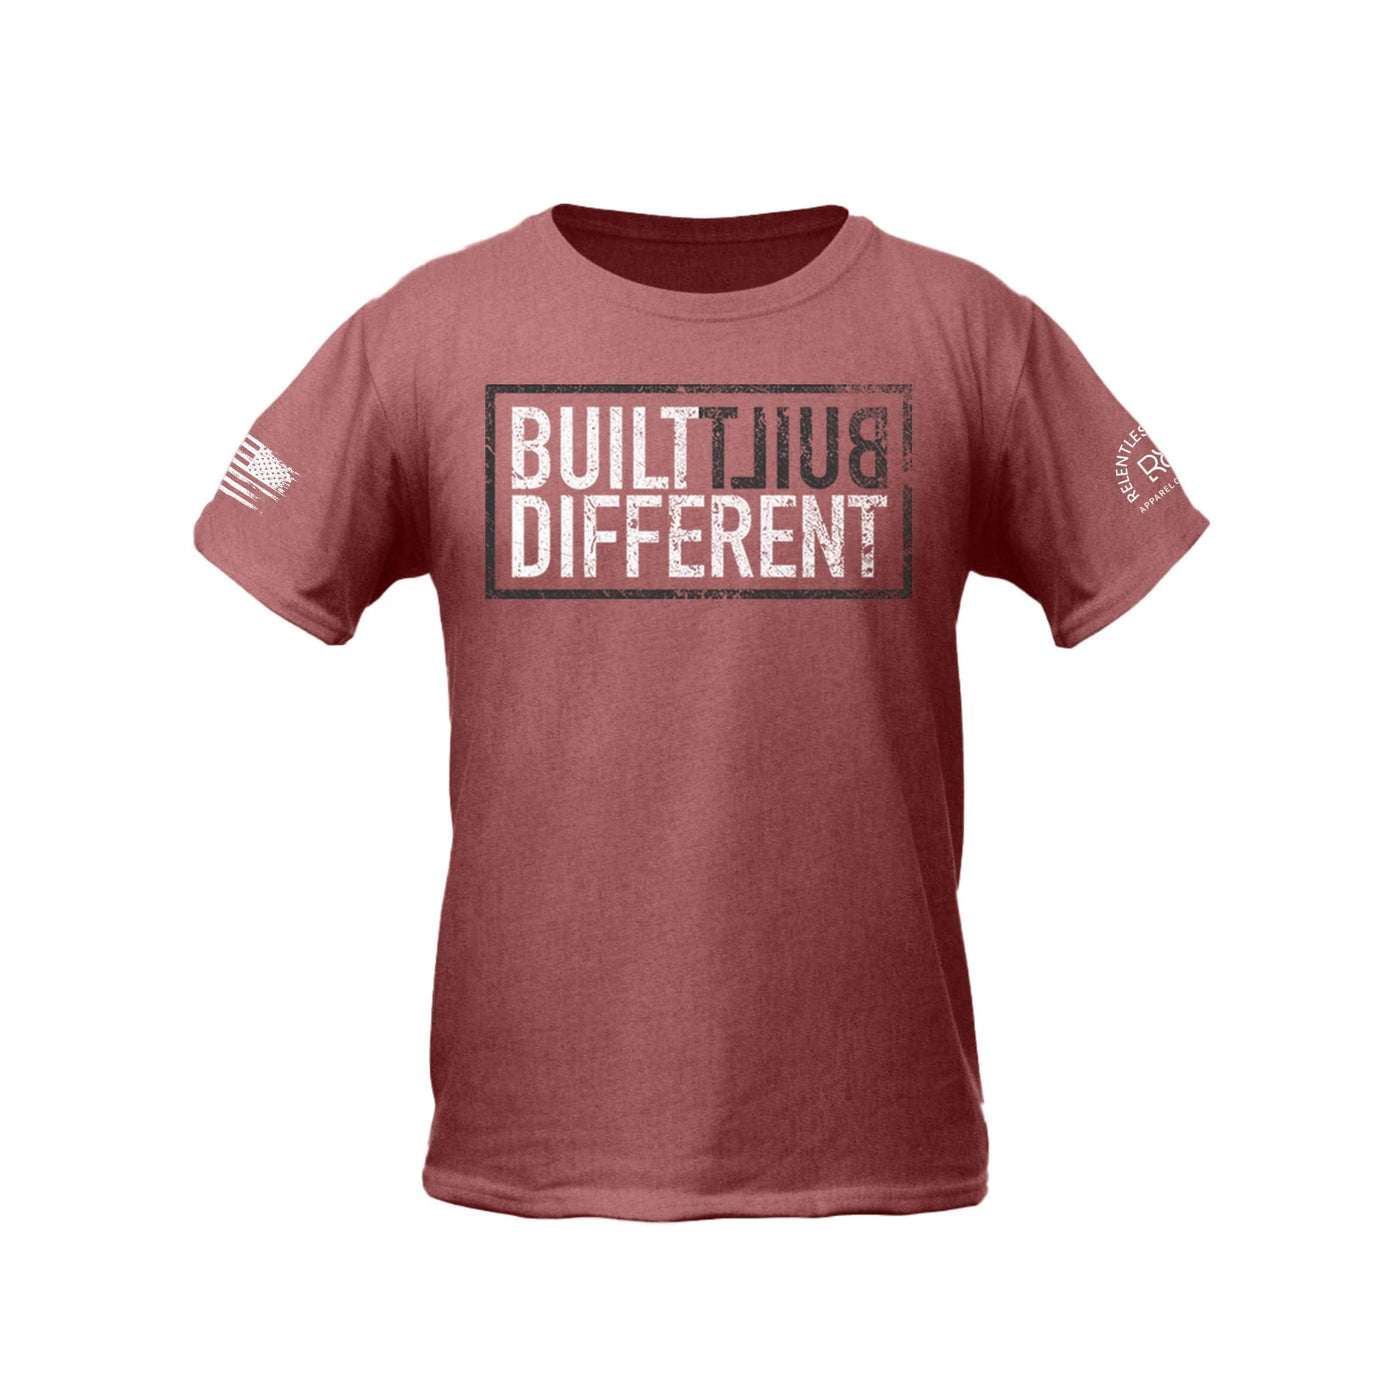 Built Different Youth front design heather mauve tee